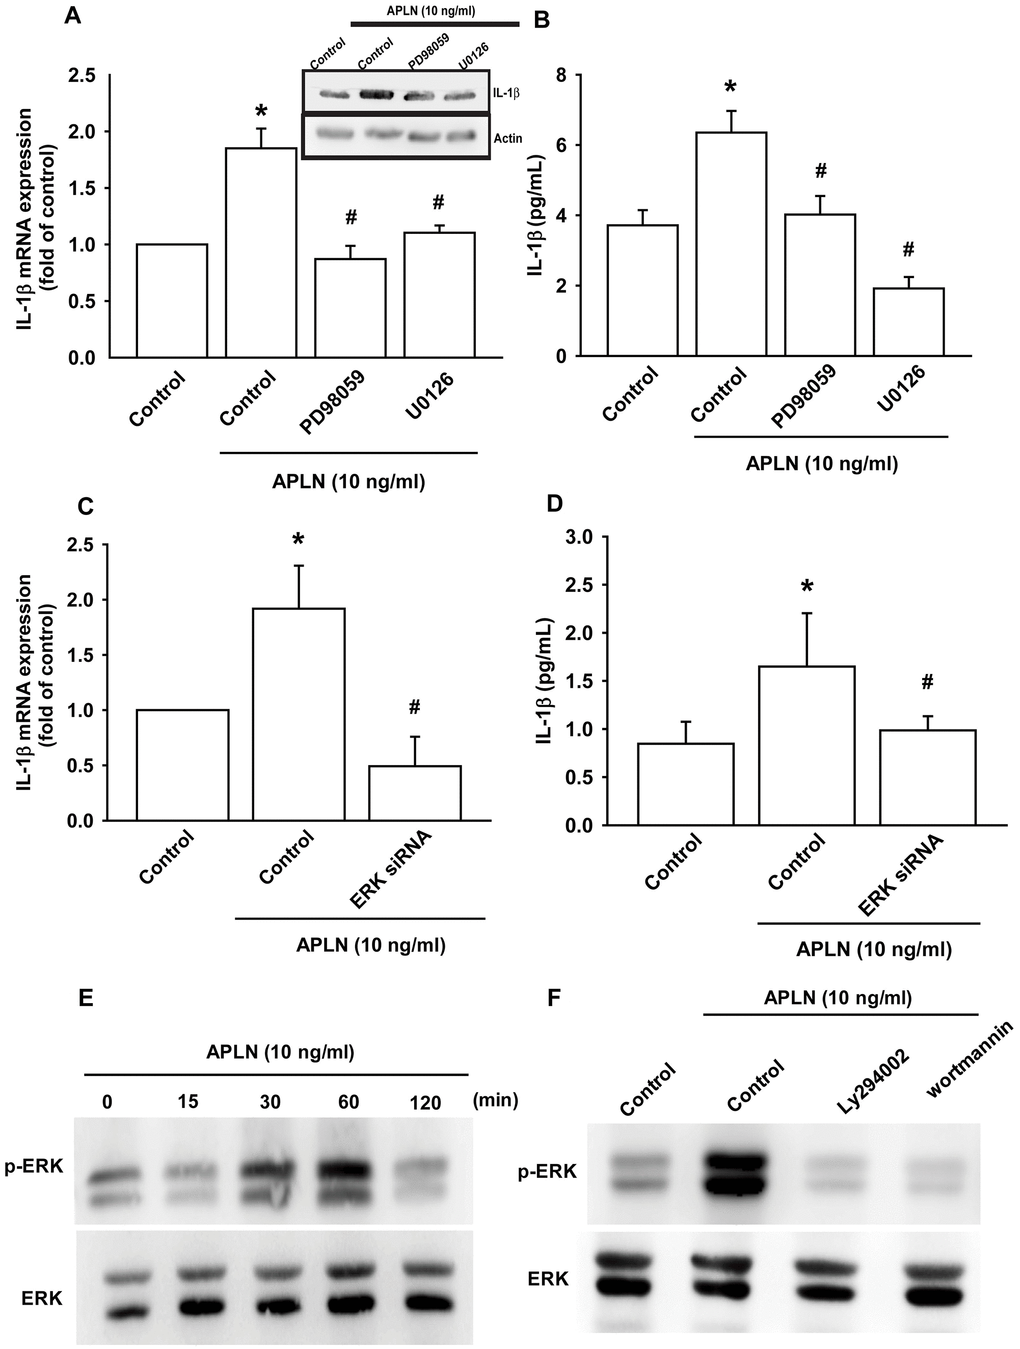 ERK phosphorylation is involved in APLN-induced IL-1β synthesis. (A) OASFs were pretreated with ERK inhibitors (PD98059, U0126; 10 μM) for 30 min, then incubated with APLN (10 ng/mL) for 24 h. IL-1β mRNA and protein levels were examined by RT-qPCR (n=4) and Western blot (n=3) assays, respectively. (B) OASFs were pretreated with ERK inhibitors (PD98059, U0126; 10 μM) for 30 min, then incubated with APLN (10 ng/mL) for 24 h. Excreted IL-1β protein levels were examined by ELISA (n=5). (C) OASFs were transfected with ERK siRNA (1 μg), then incubated with APLN (10 ng/mL) for 24 h. IL-1β mRNA levels were examined by ELISA assay (n=5). (D) OASFs were transfected with ERK siRNA (1 μg), then incubated with APLN (10 ng/mL) for 24 h. Excreted IL-1β protein levels were examined by ELISA assay (n=5). (E) OASFs were incubated with APLN (10 ng/mL) for the indicated time intervals, and the extent of ERK phosphorylation was examined by Western blot (n=3). (F) OASFs were pretreated with LY294002 and Wortmannin (10 μM) for 30 min, then incubated with APLN (10 ng/mL) for 24 h. The extent of ERK phosphorylation was examined by Western blot (n=3). * pp